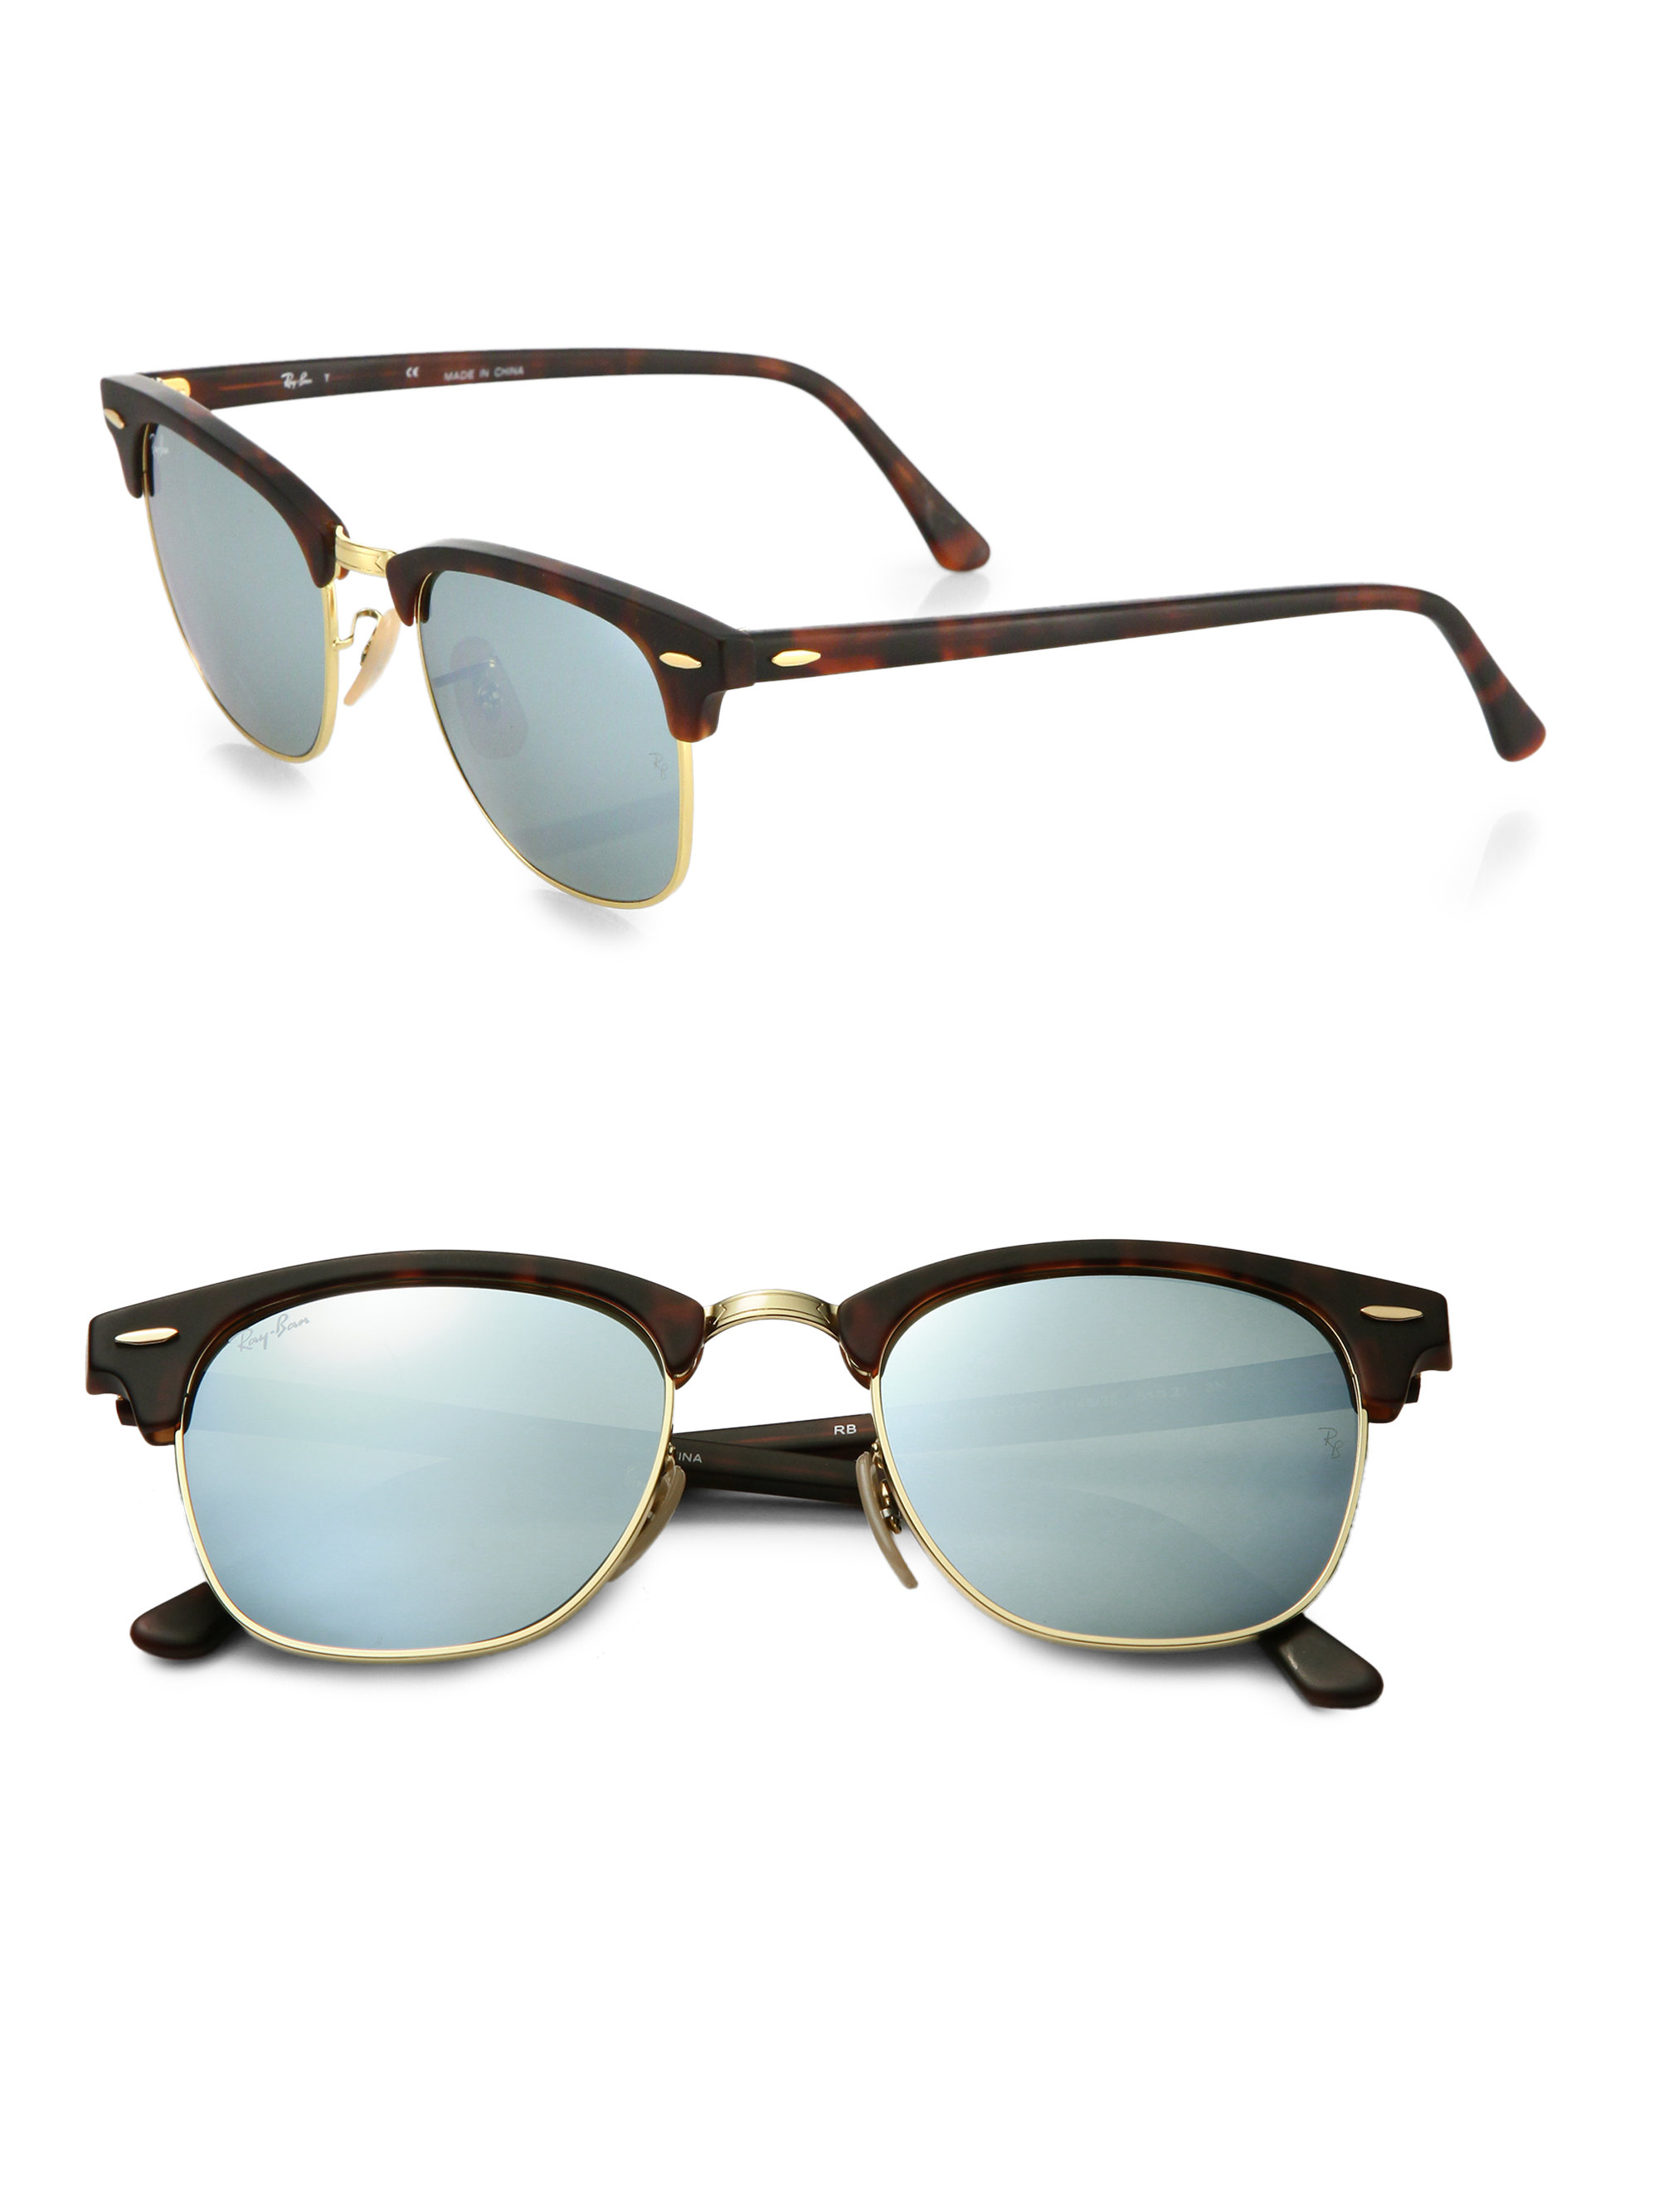 2019 how much ray ban sunglasses sale cheap online sale